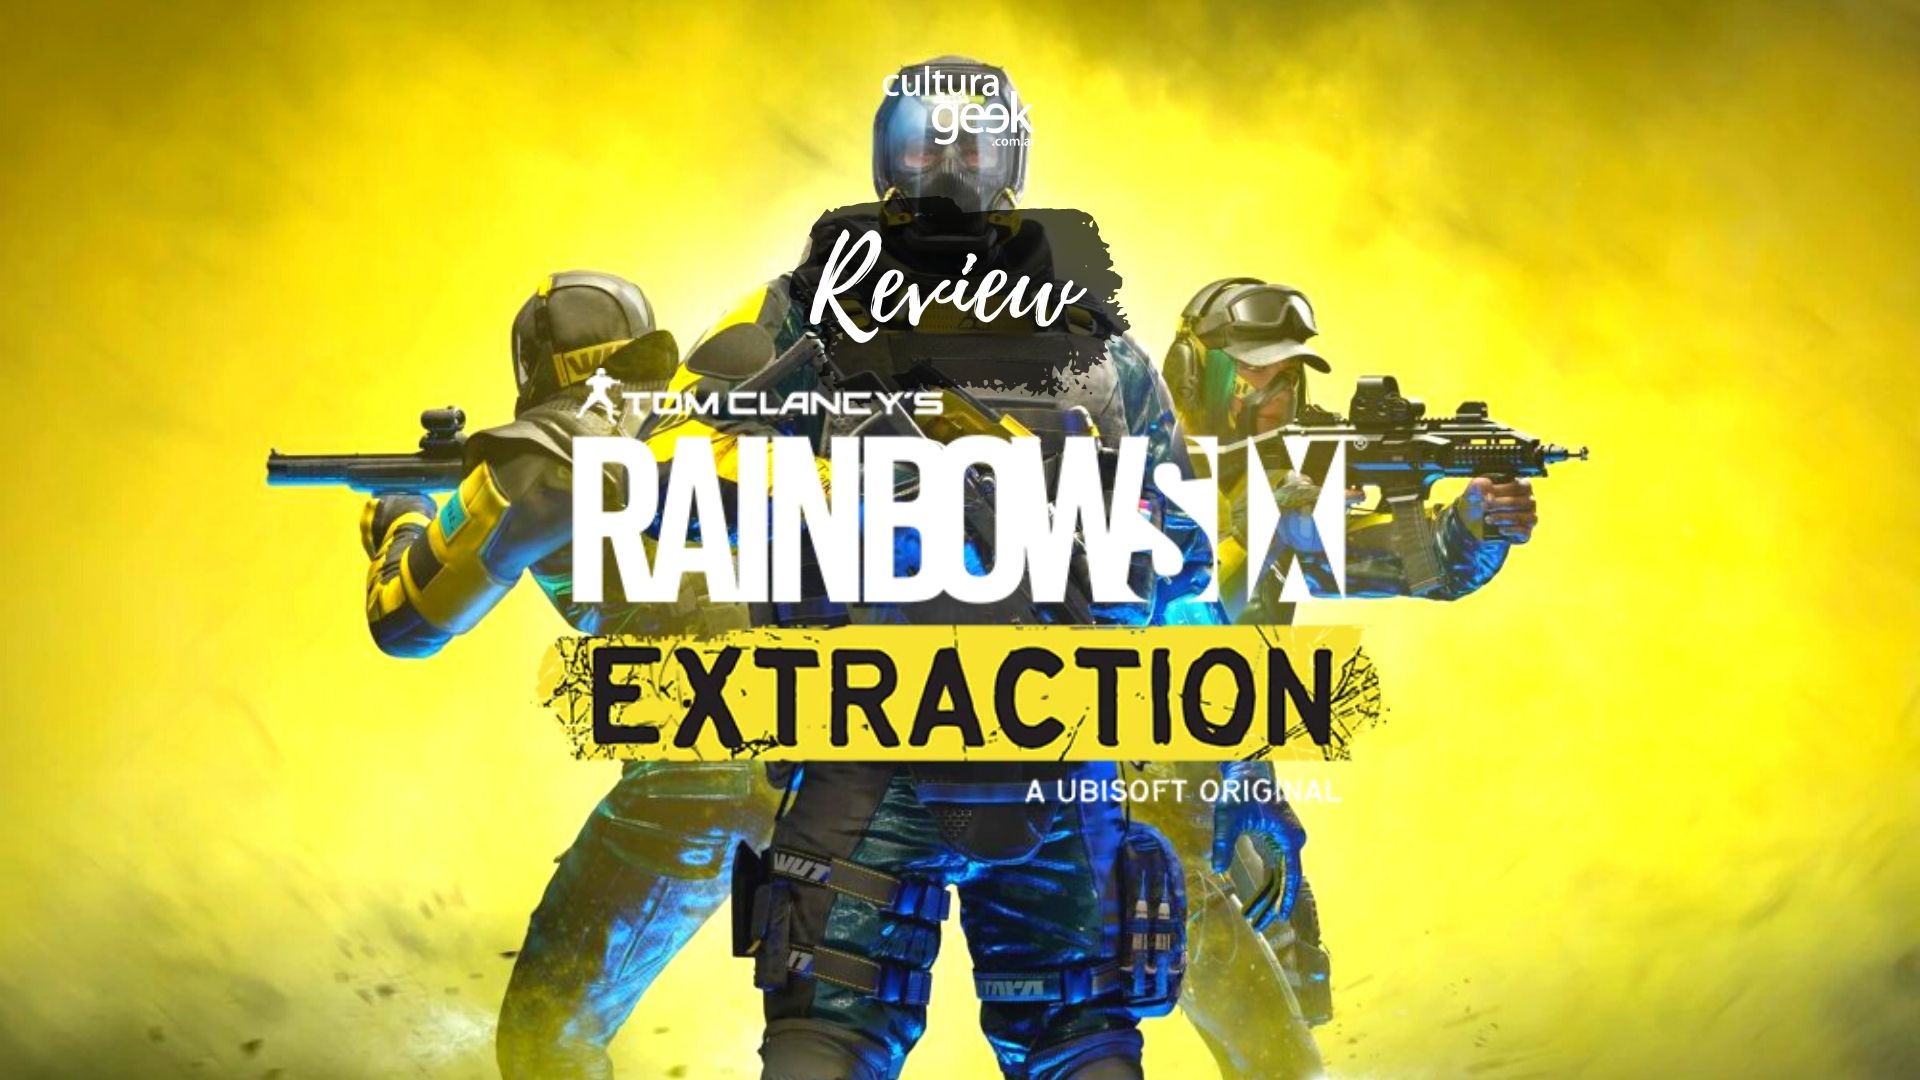 Review culturageek rainbow six extraction